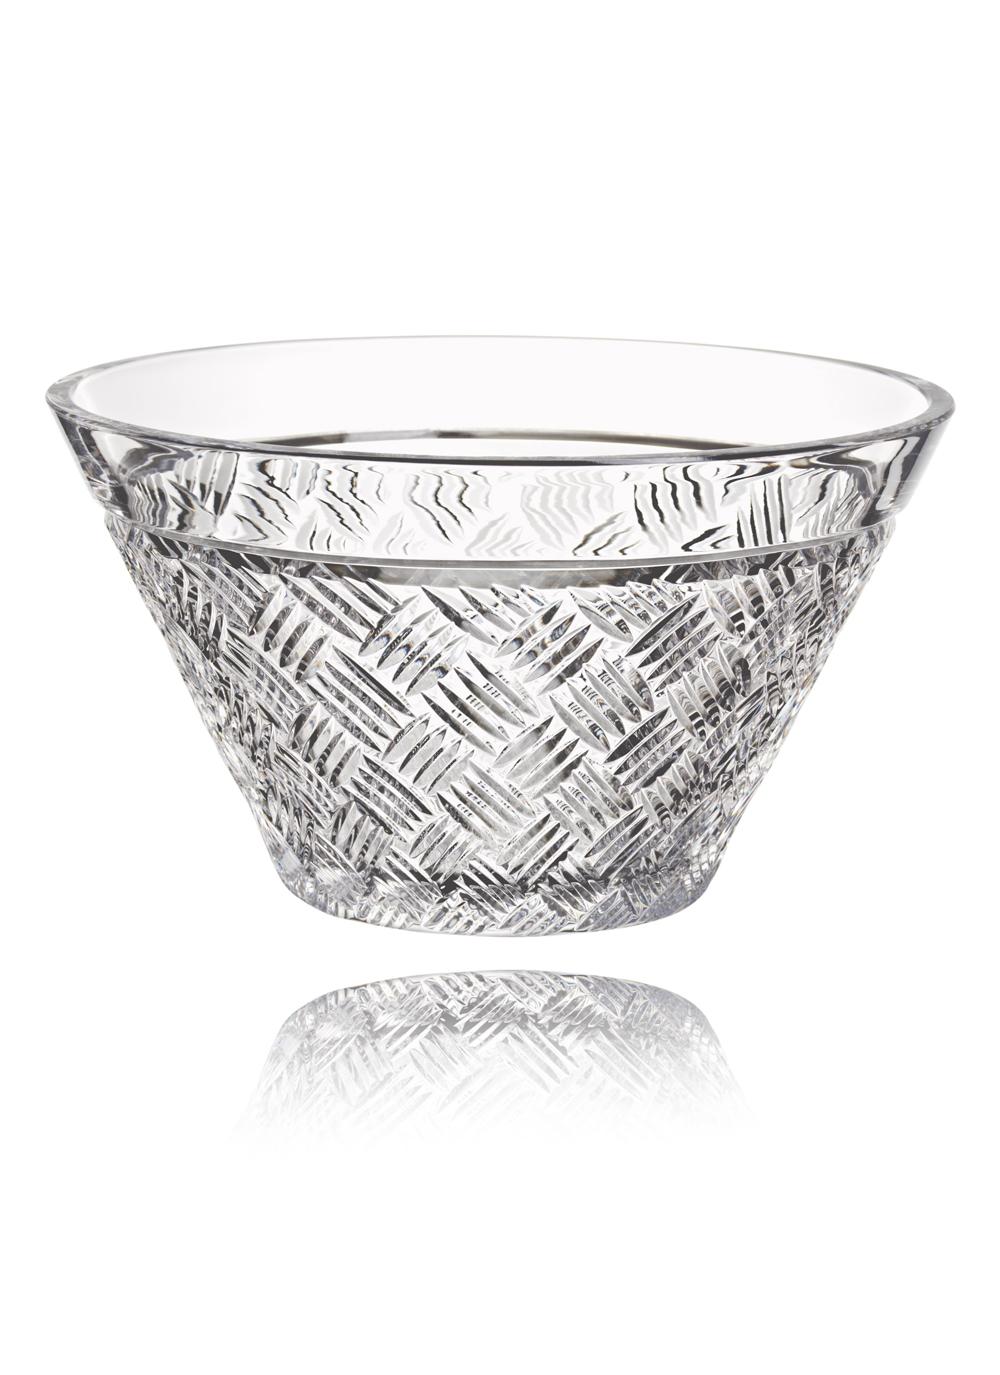 Marquis by Waterford Versa Crystal Bowl 11" - Royal Gift